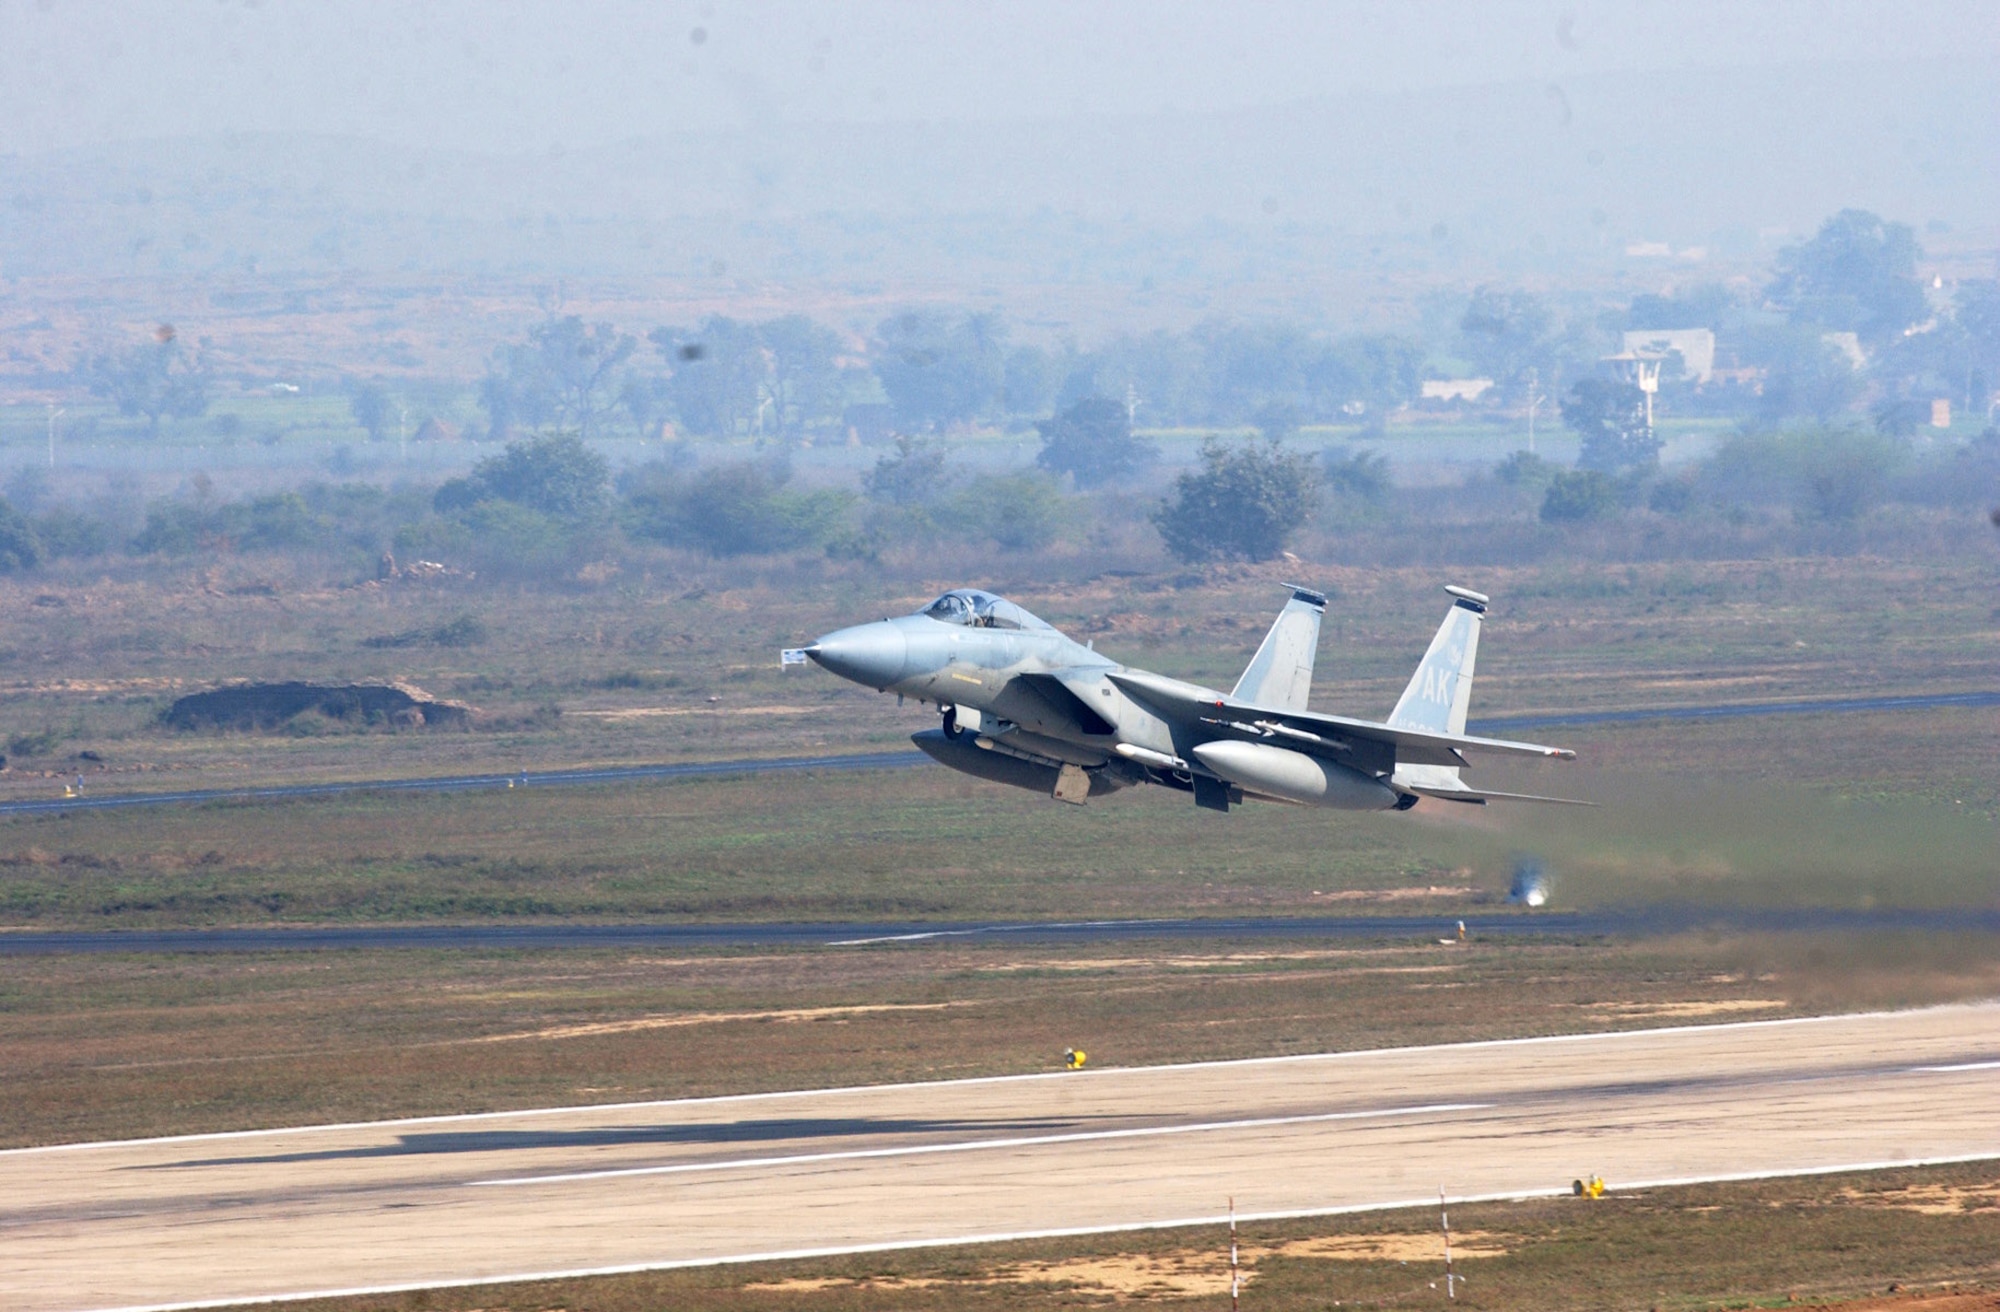 GWALIOR AIR FORCE STATION, India -- An F-15 Eagle takes off from here during Cope India '04, a bilateral fighter exercise between U.S. and Indian air forces.  About 150 U.S. airmen are here supporting the first bilateral fighter exercise between the two air forces in more than 40 years.  (U.S. Air Force photo by Tech. Sgt. Keith Brown)